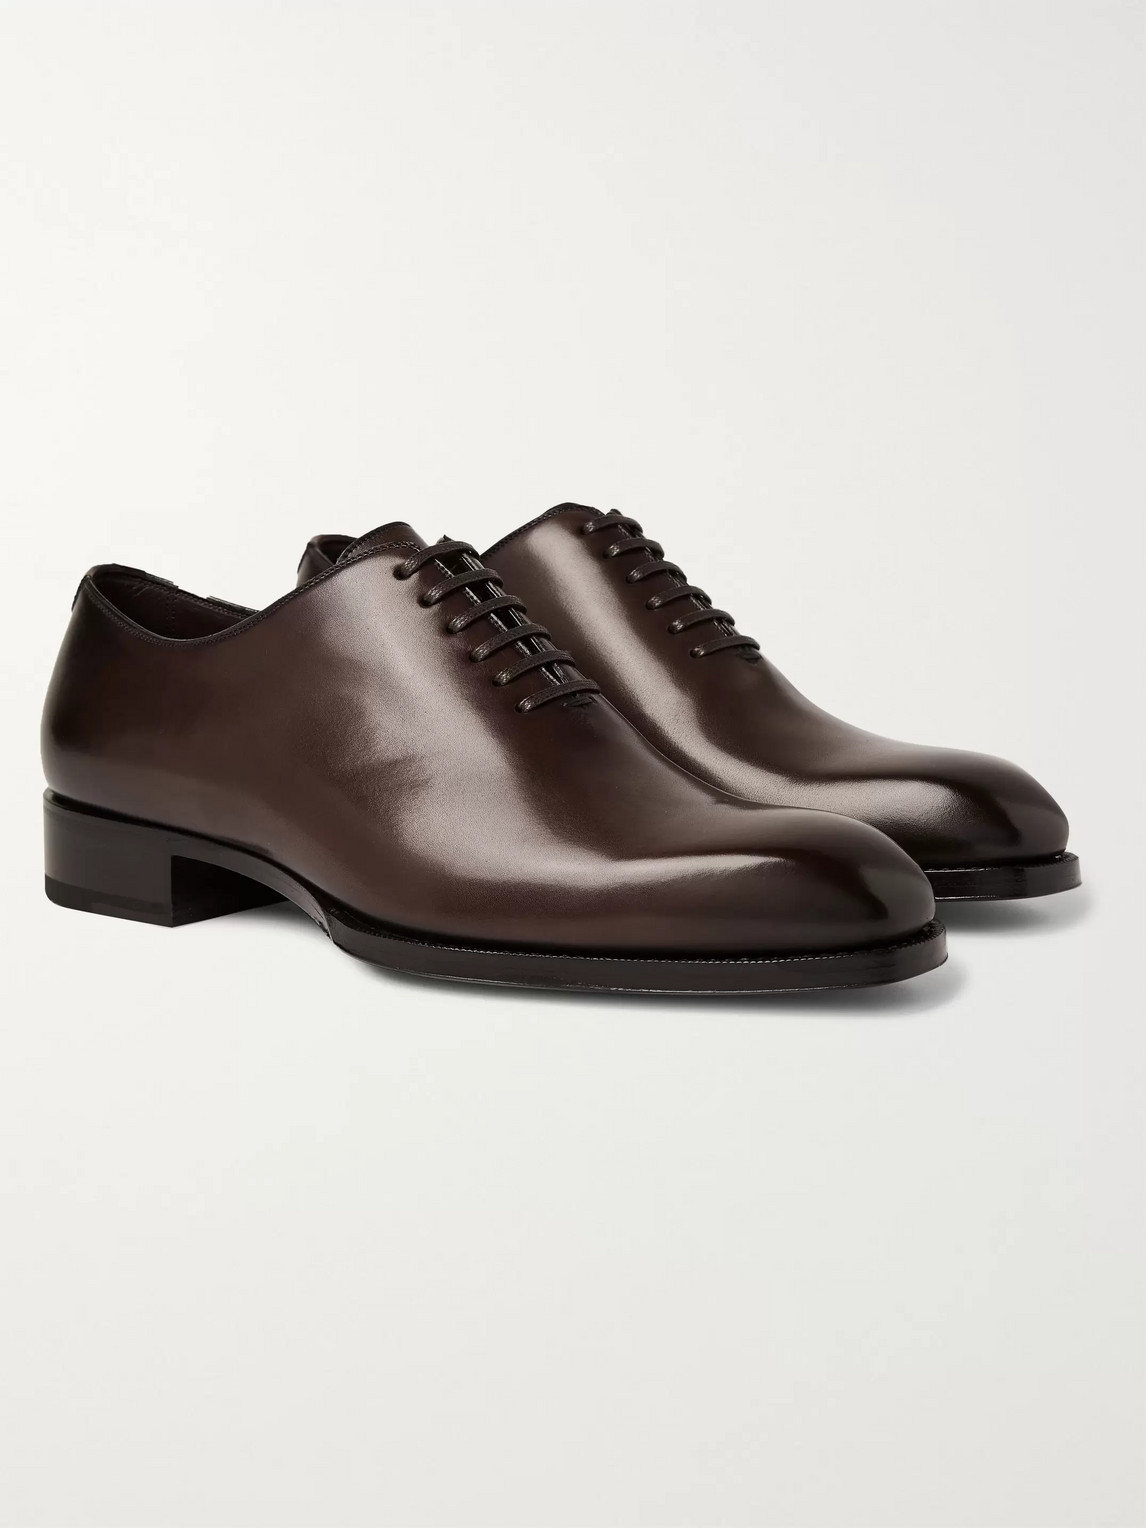 TOM FORD ELKAN WHOLE-CUT POLISHED-LEATHER OXFORD SHOES